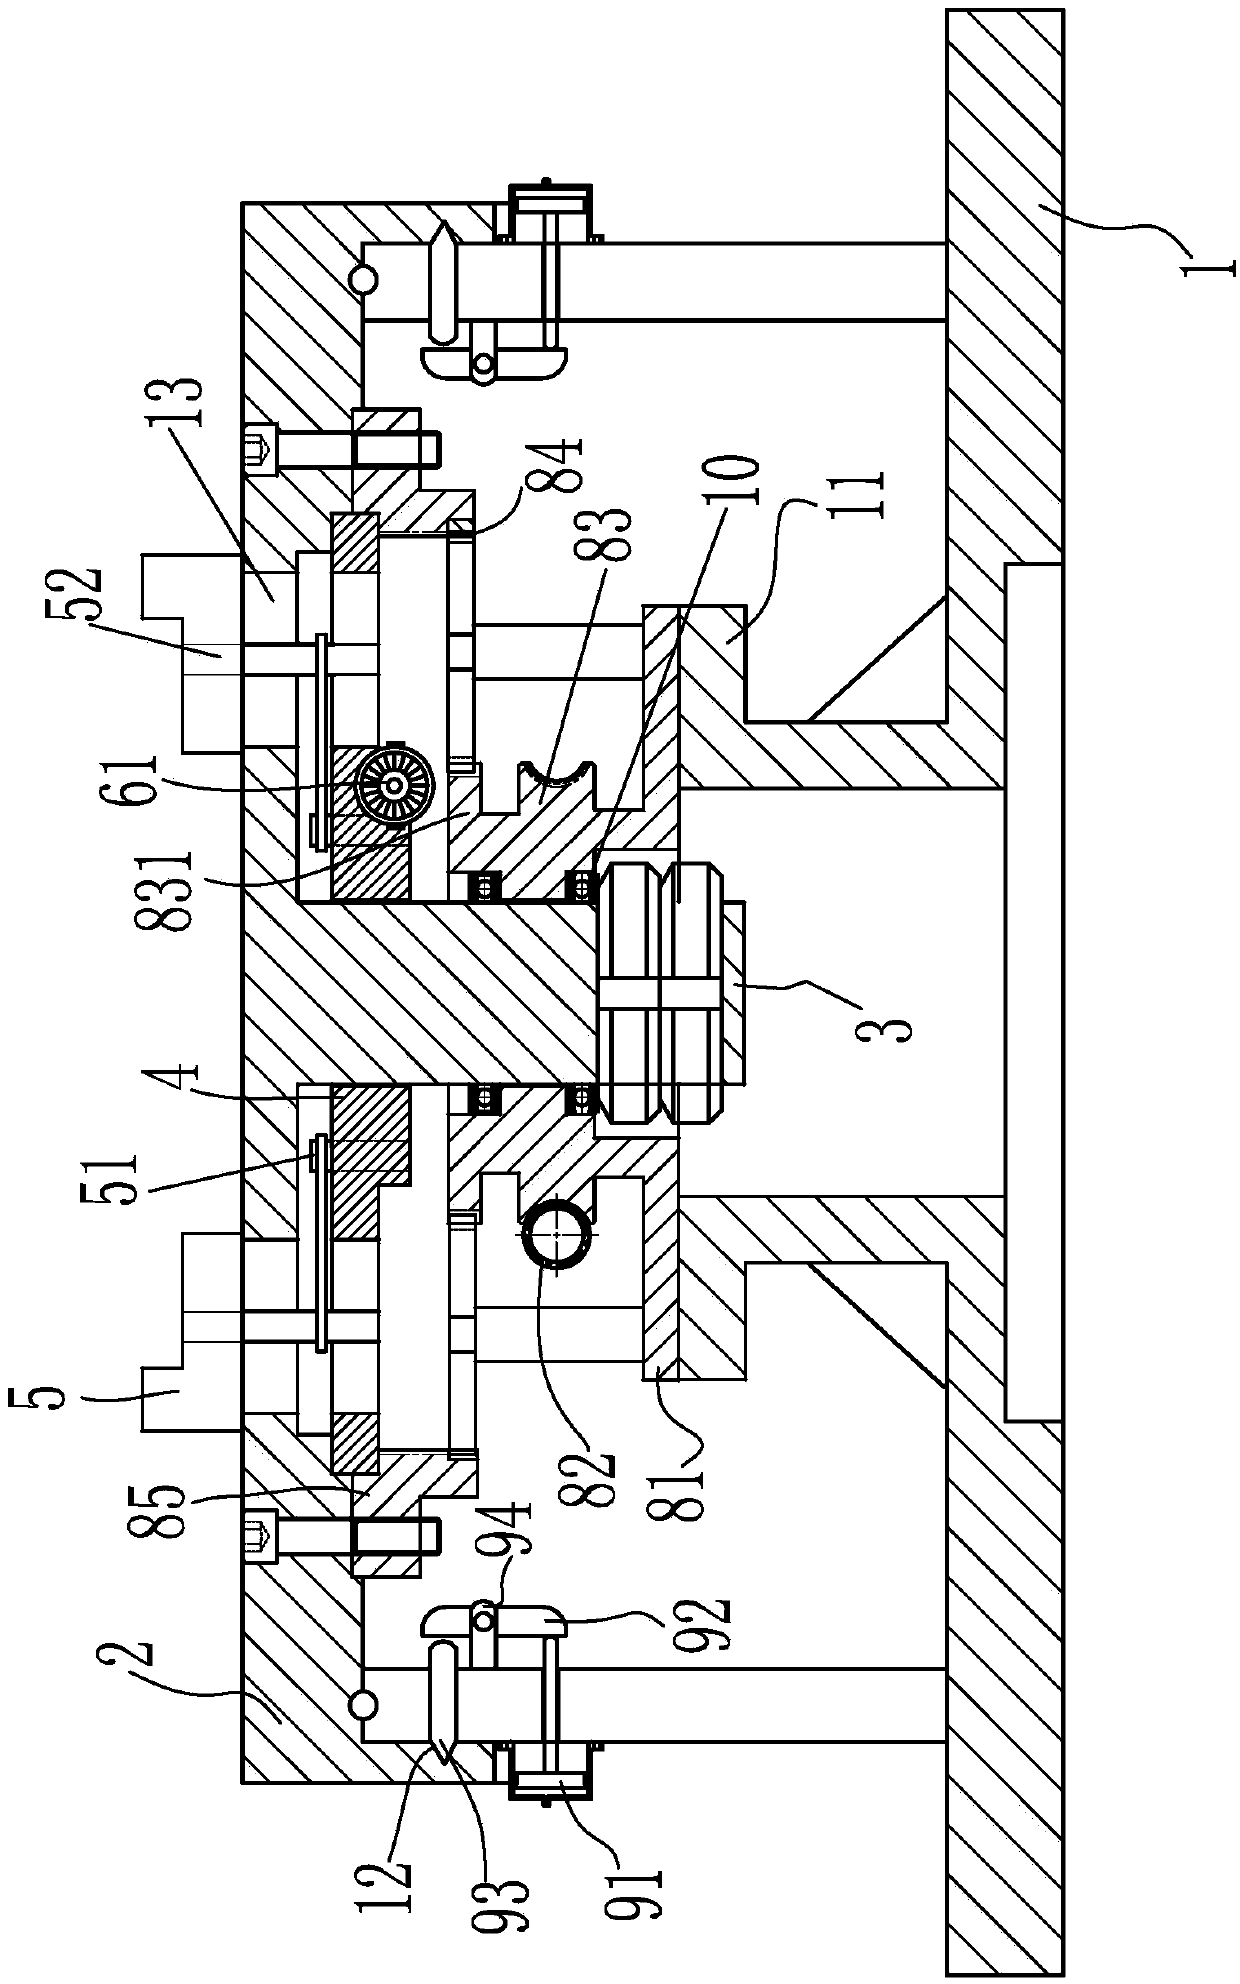 Self-centering clamping device of drill press workpiece